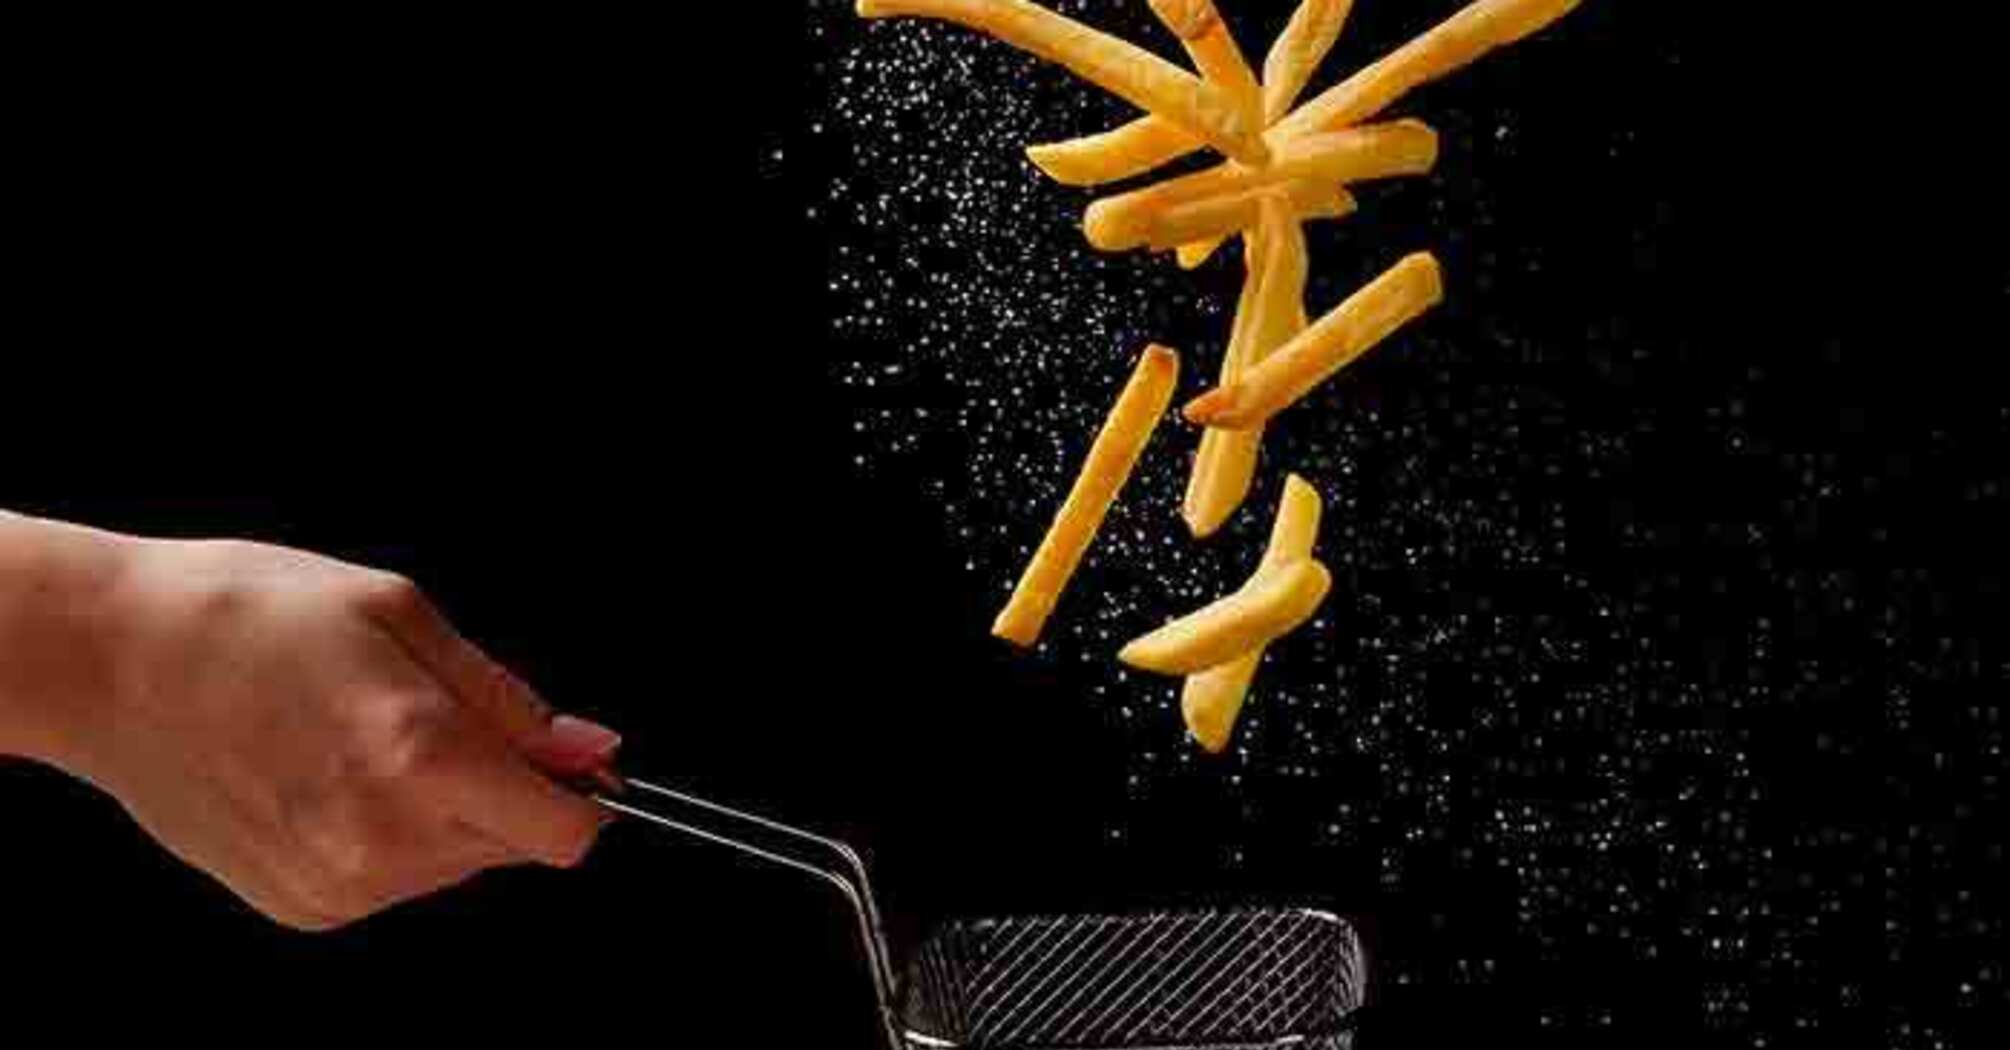 How to fry without using oil